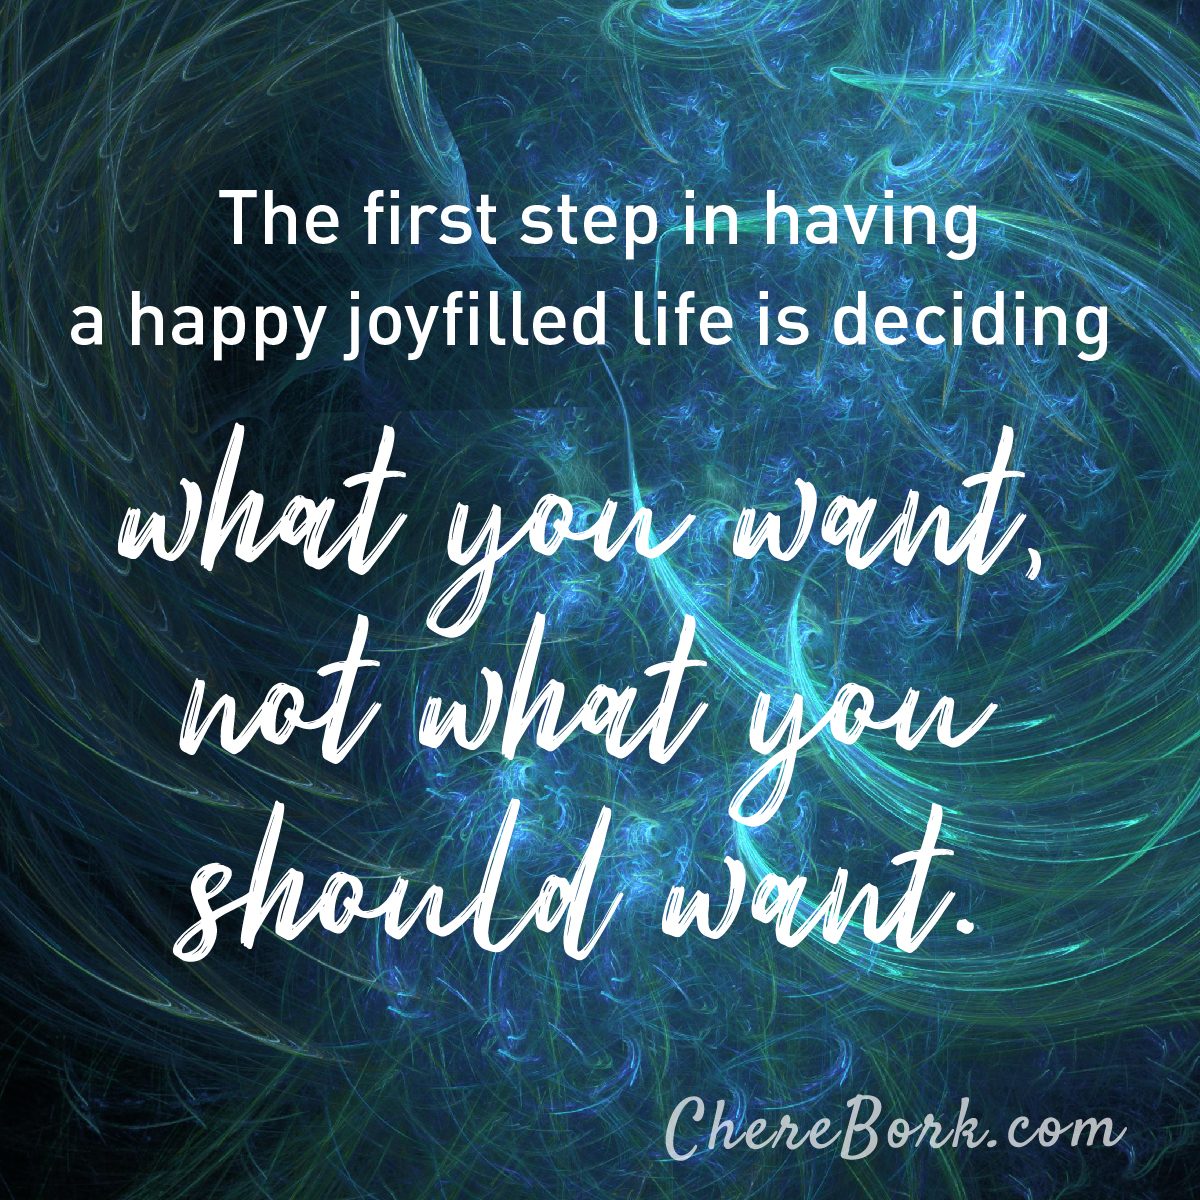 The first step in having a happy, joy-filled life is deciding what you want, not what you should want. -Chere Bork